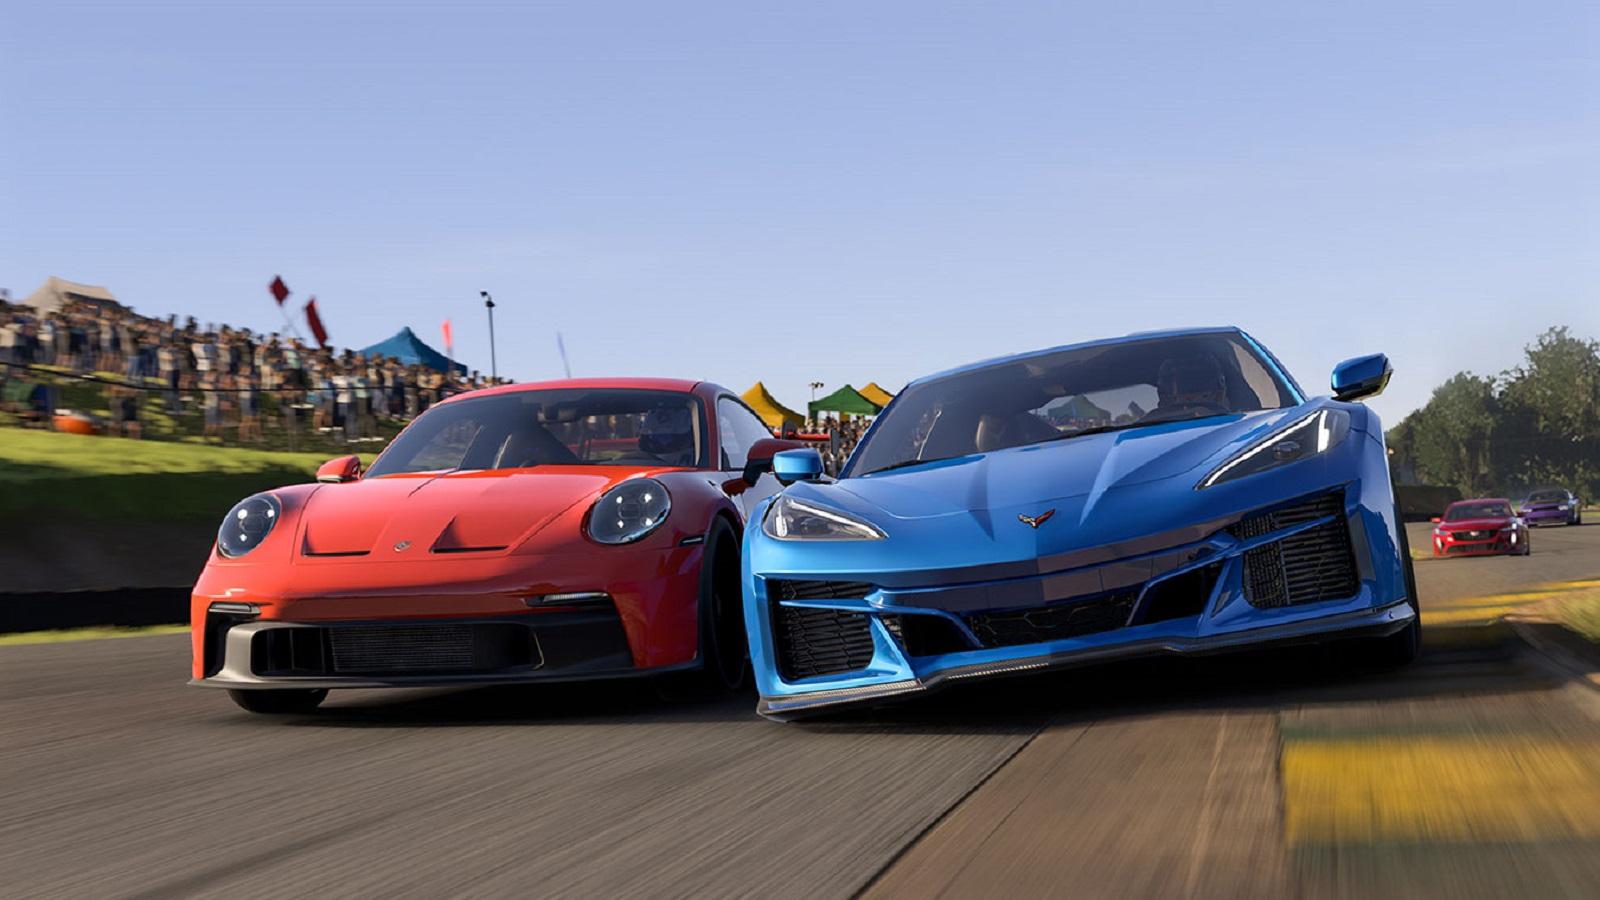 Get Forza Horizon 5 For $1 On Xbox Game Pass For PC Or Ultimate 